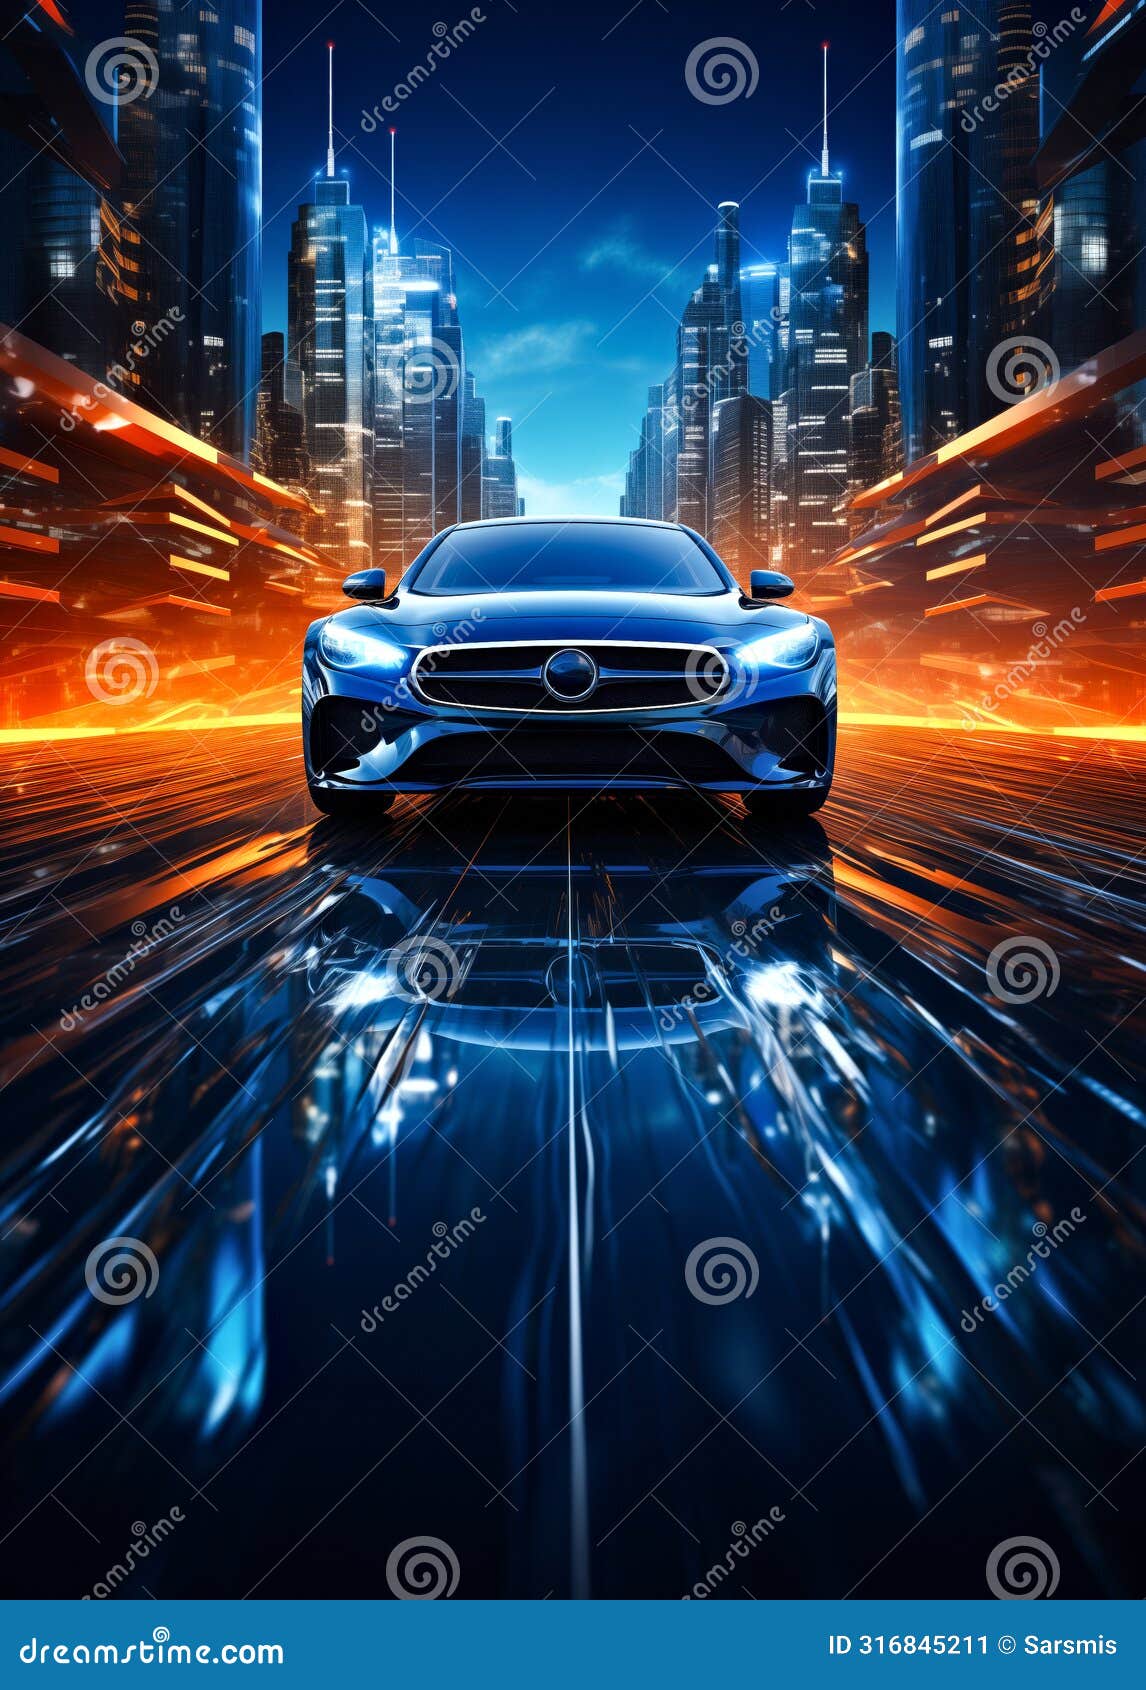 a sleek futuristic car speeds through a vibrant urban nightscape, with a sense of motion and advanced technology